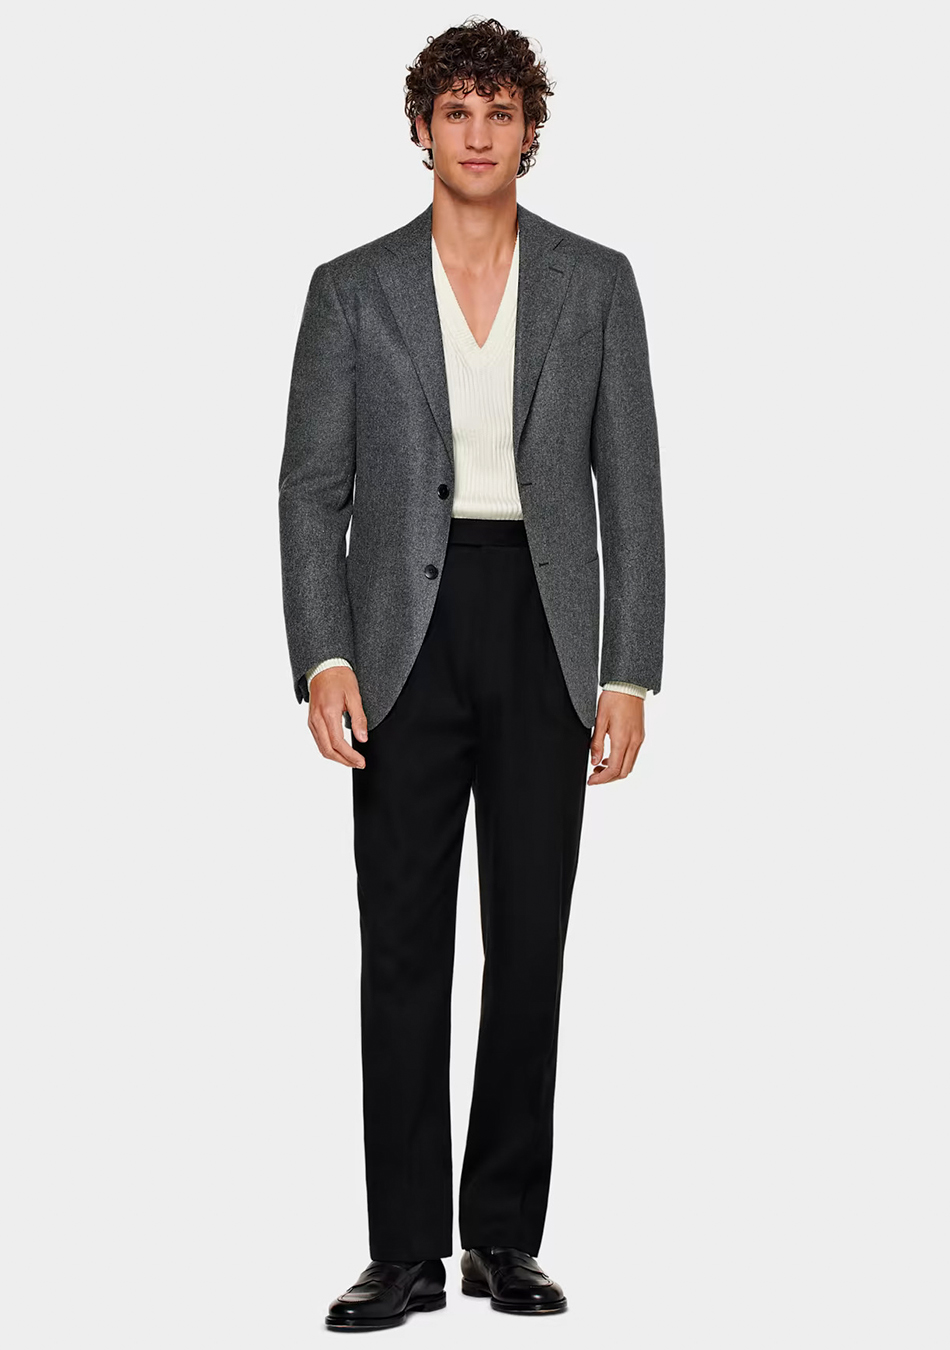 Grey blazer, off-white v neck sweater, black pleated pants, and black penny loafers